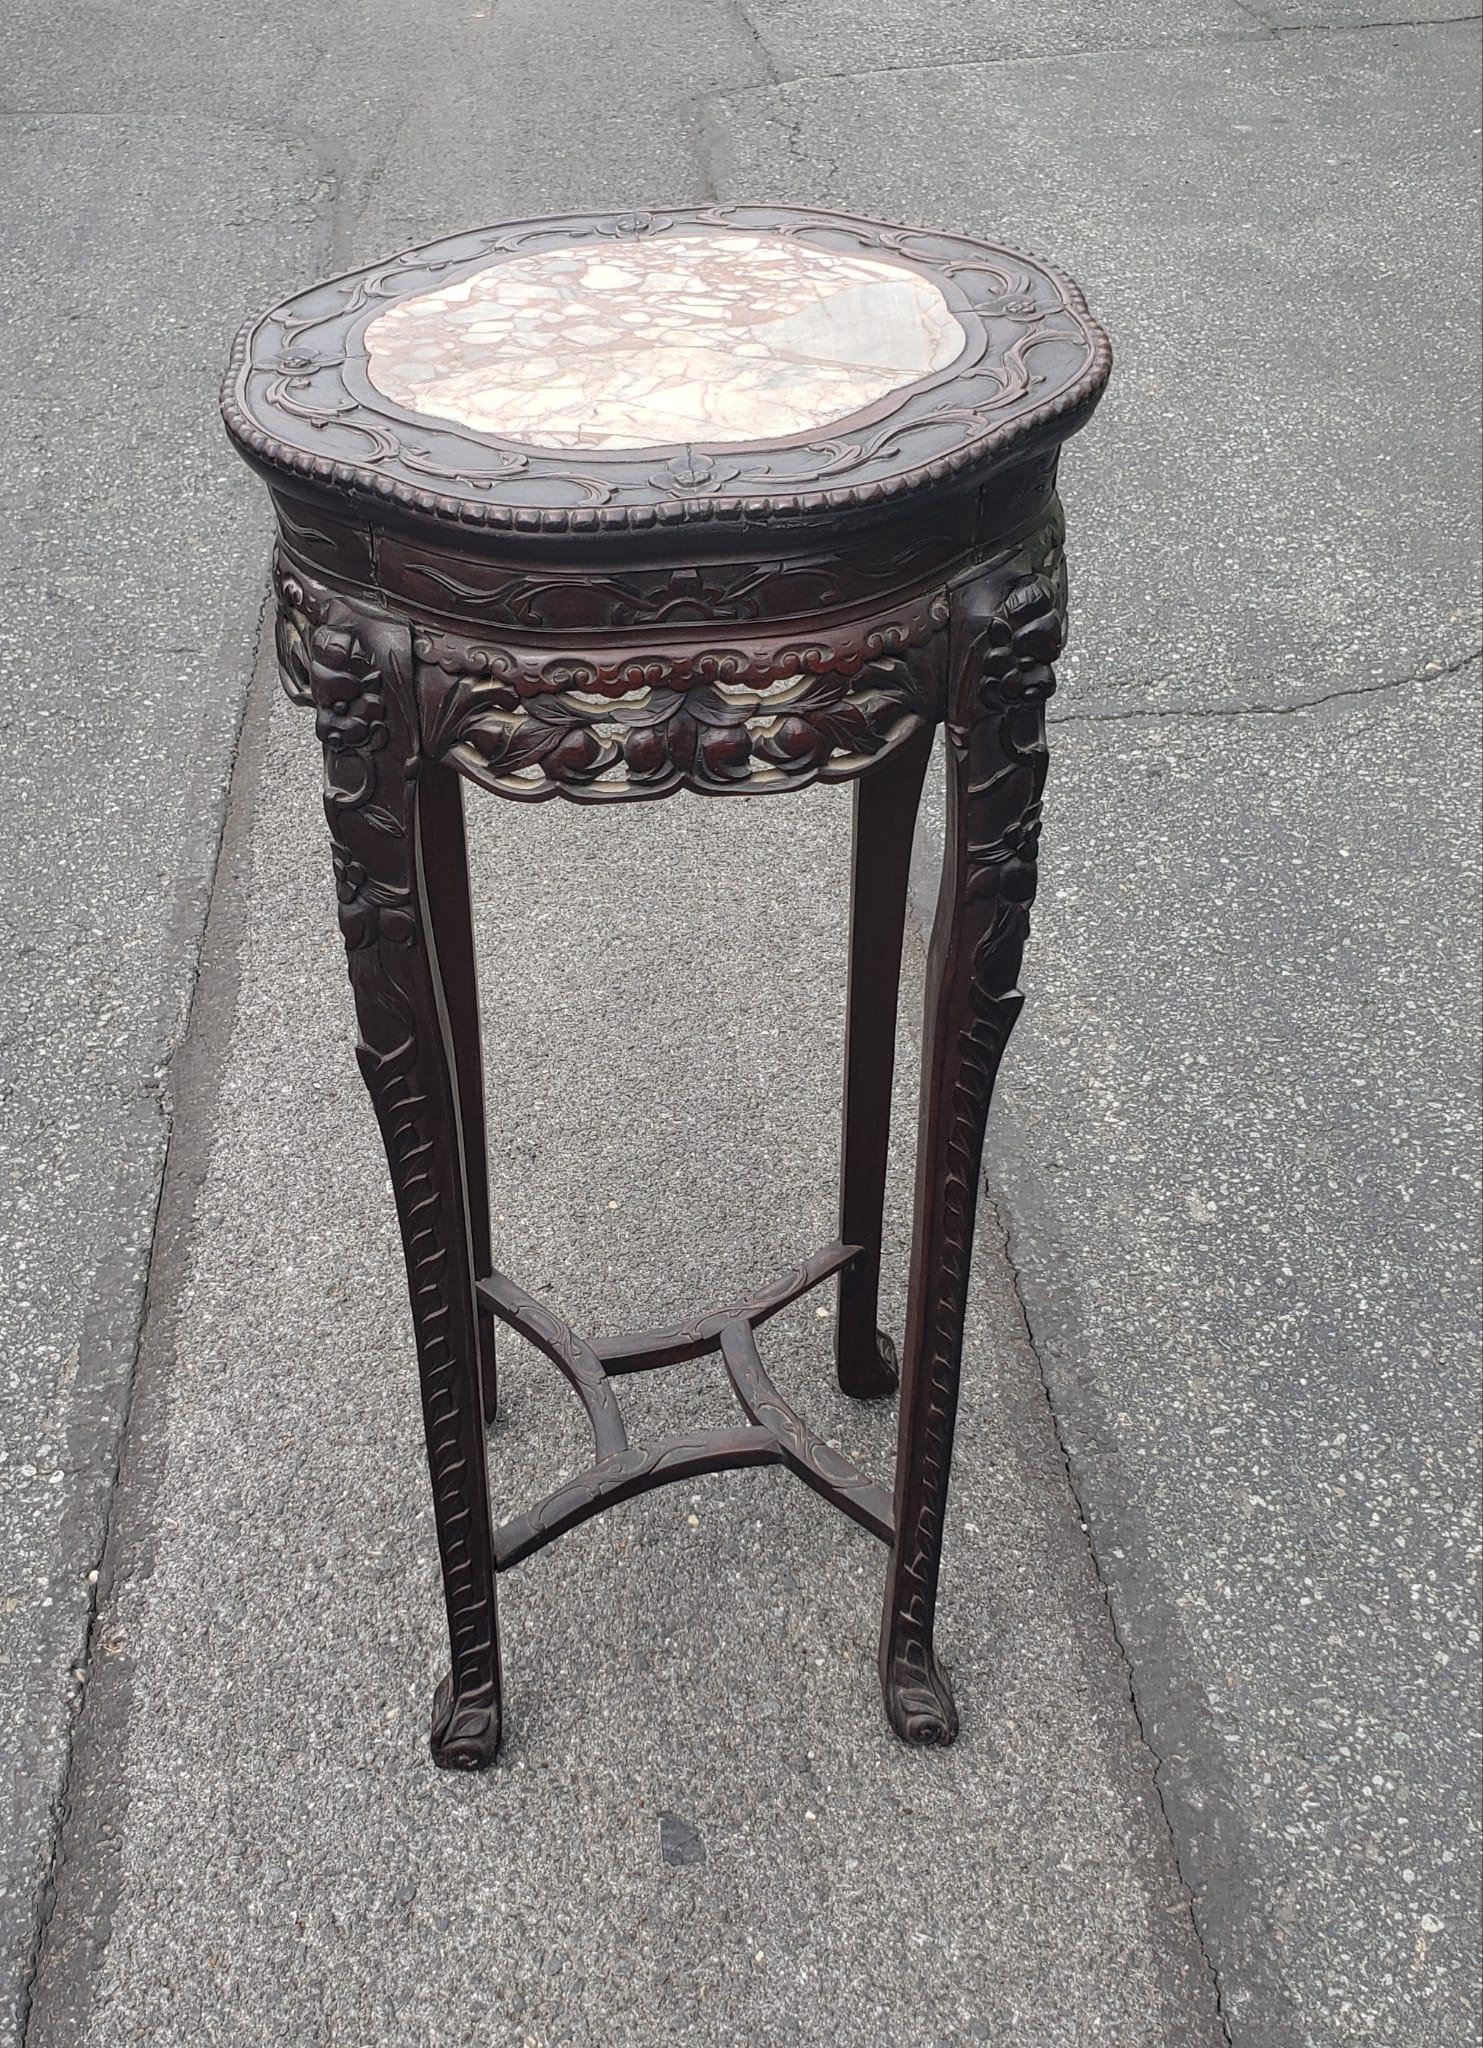 20th Century Chinese Carved Hongmu And Marble Inset Tabouret Pedestal, Circa 1900s For Sale